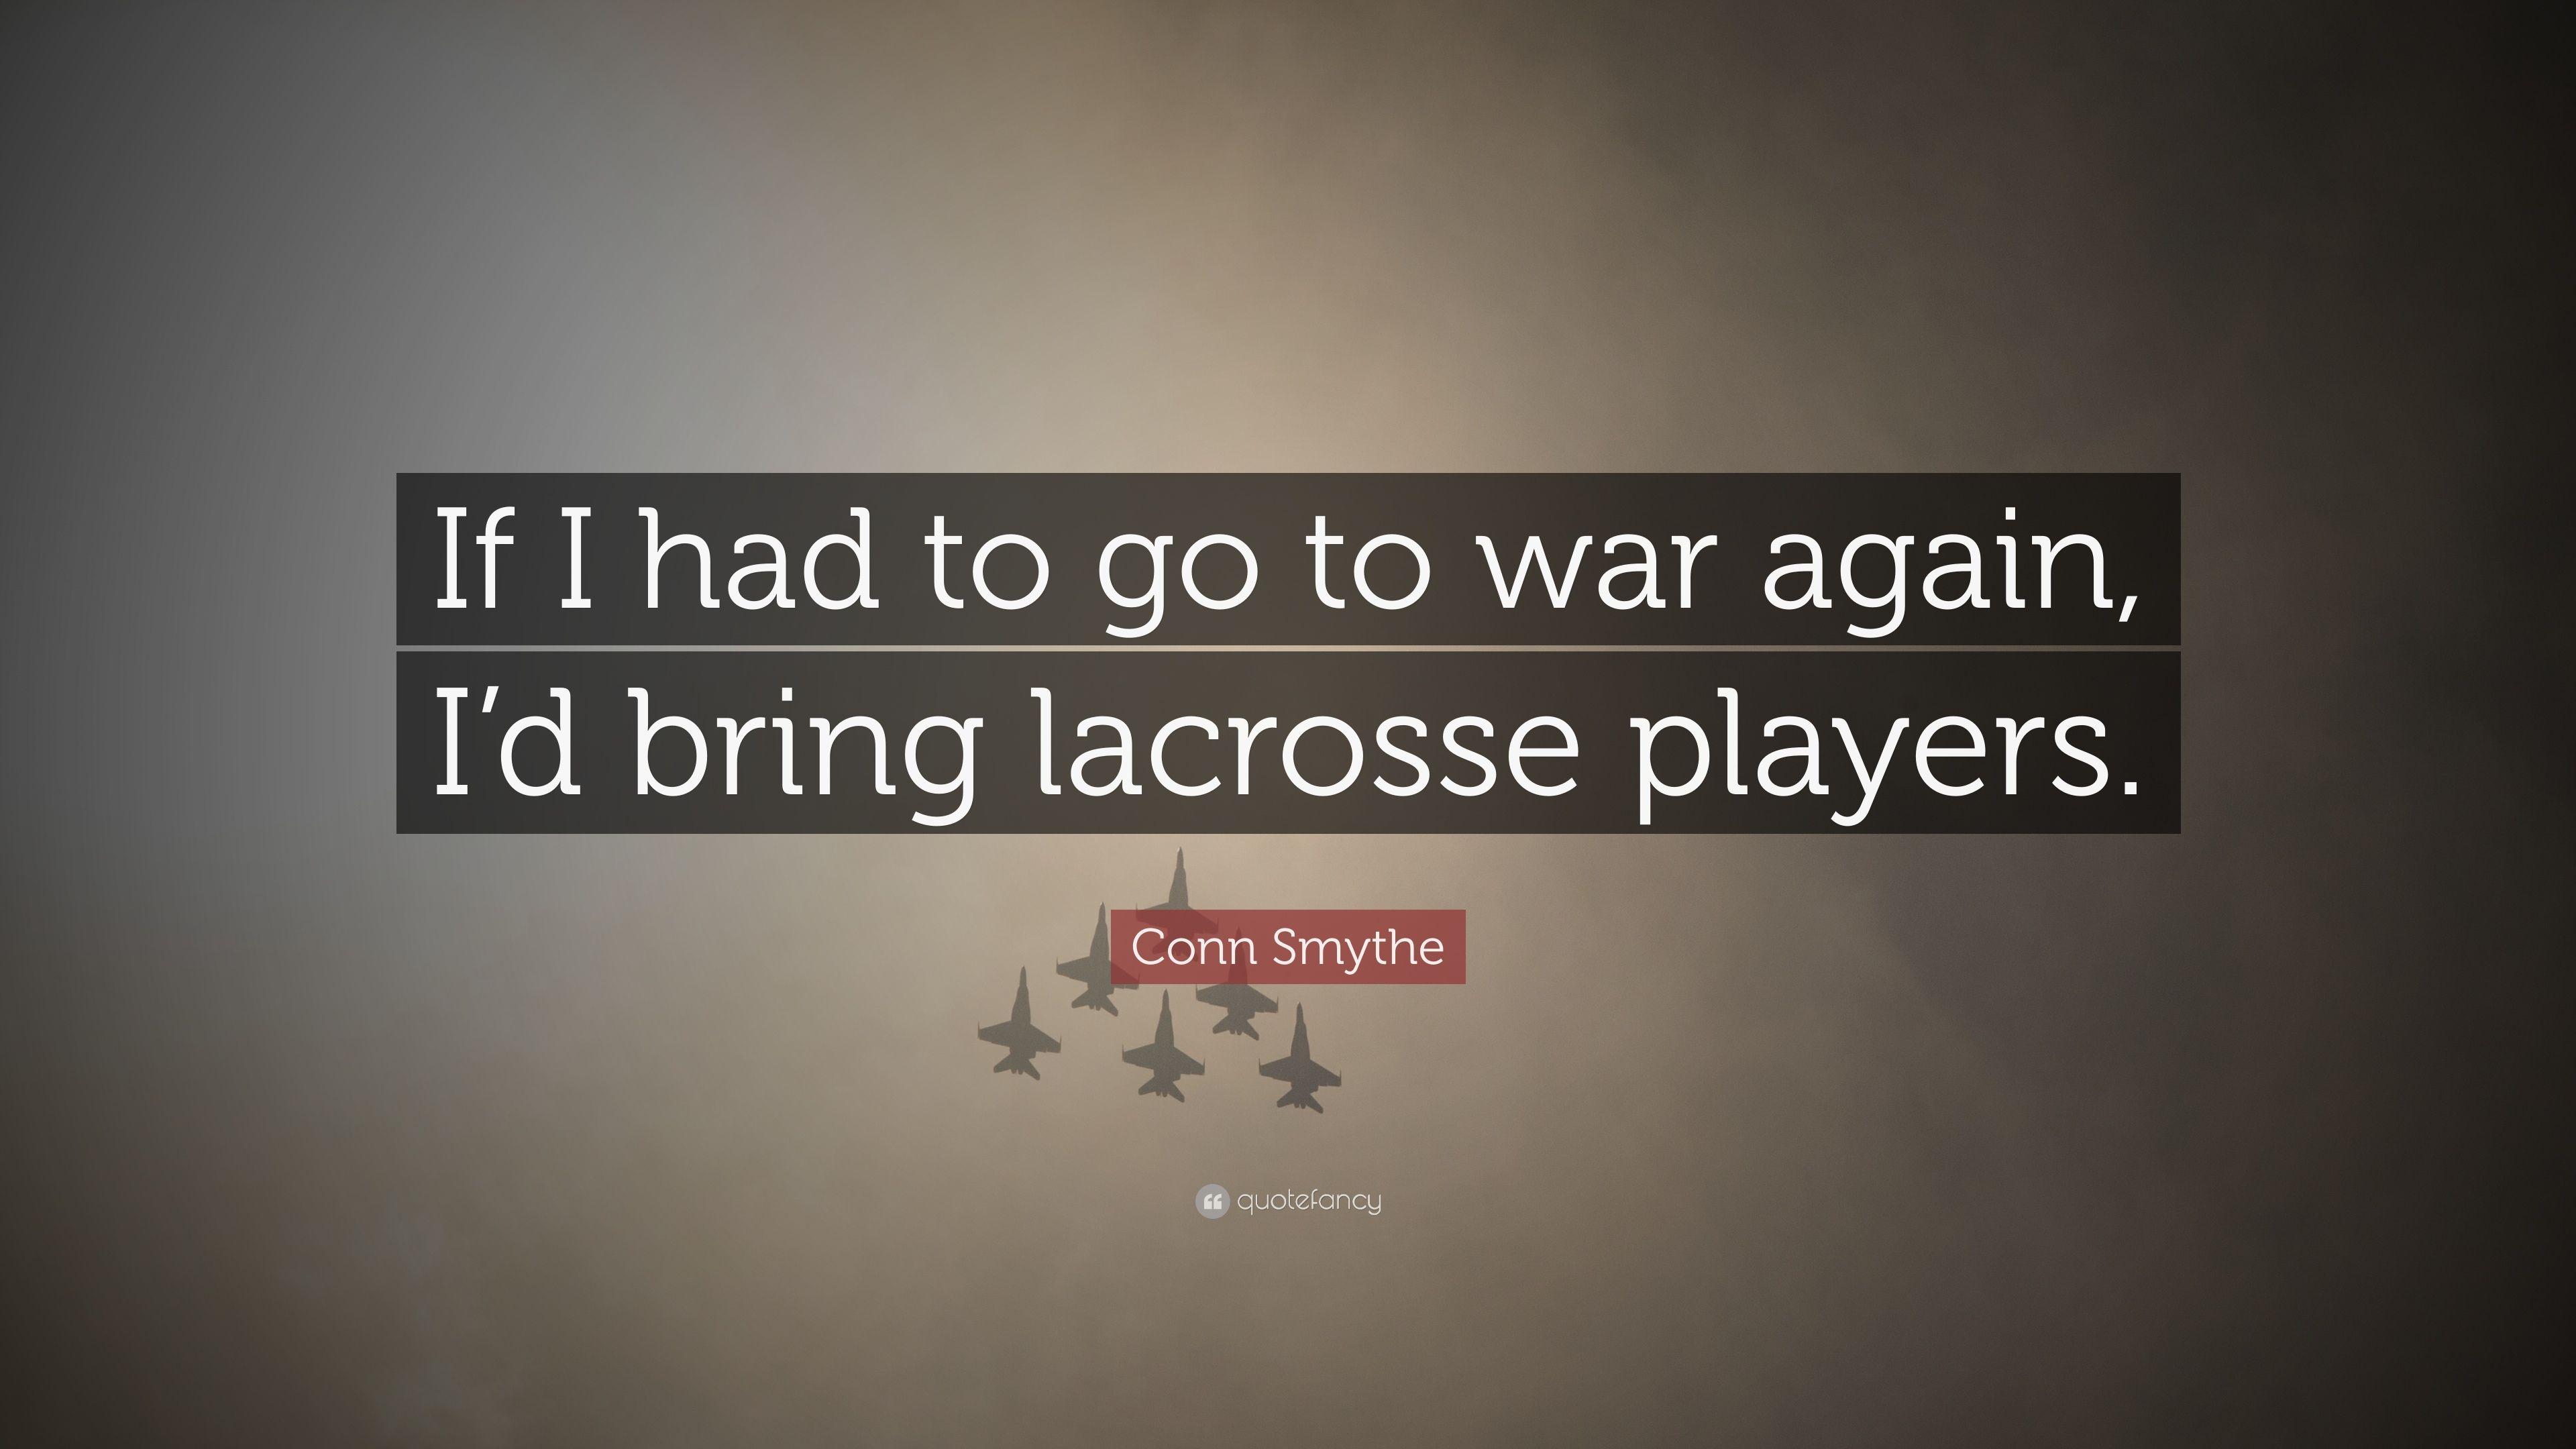 Conn Smythe Quote: “If I had to go to war again, I'd bring lacrosse